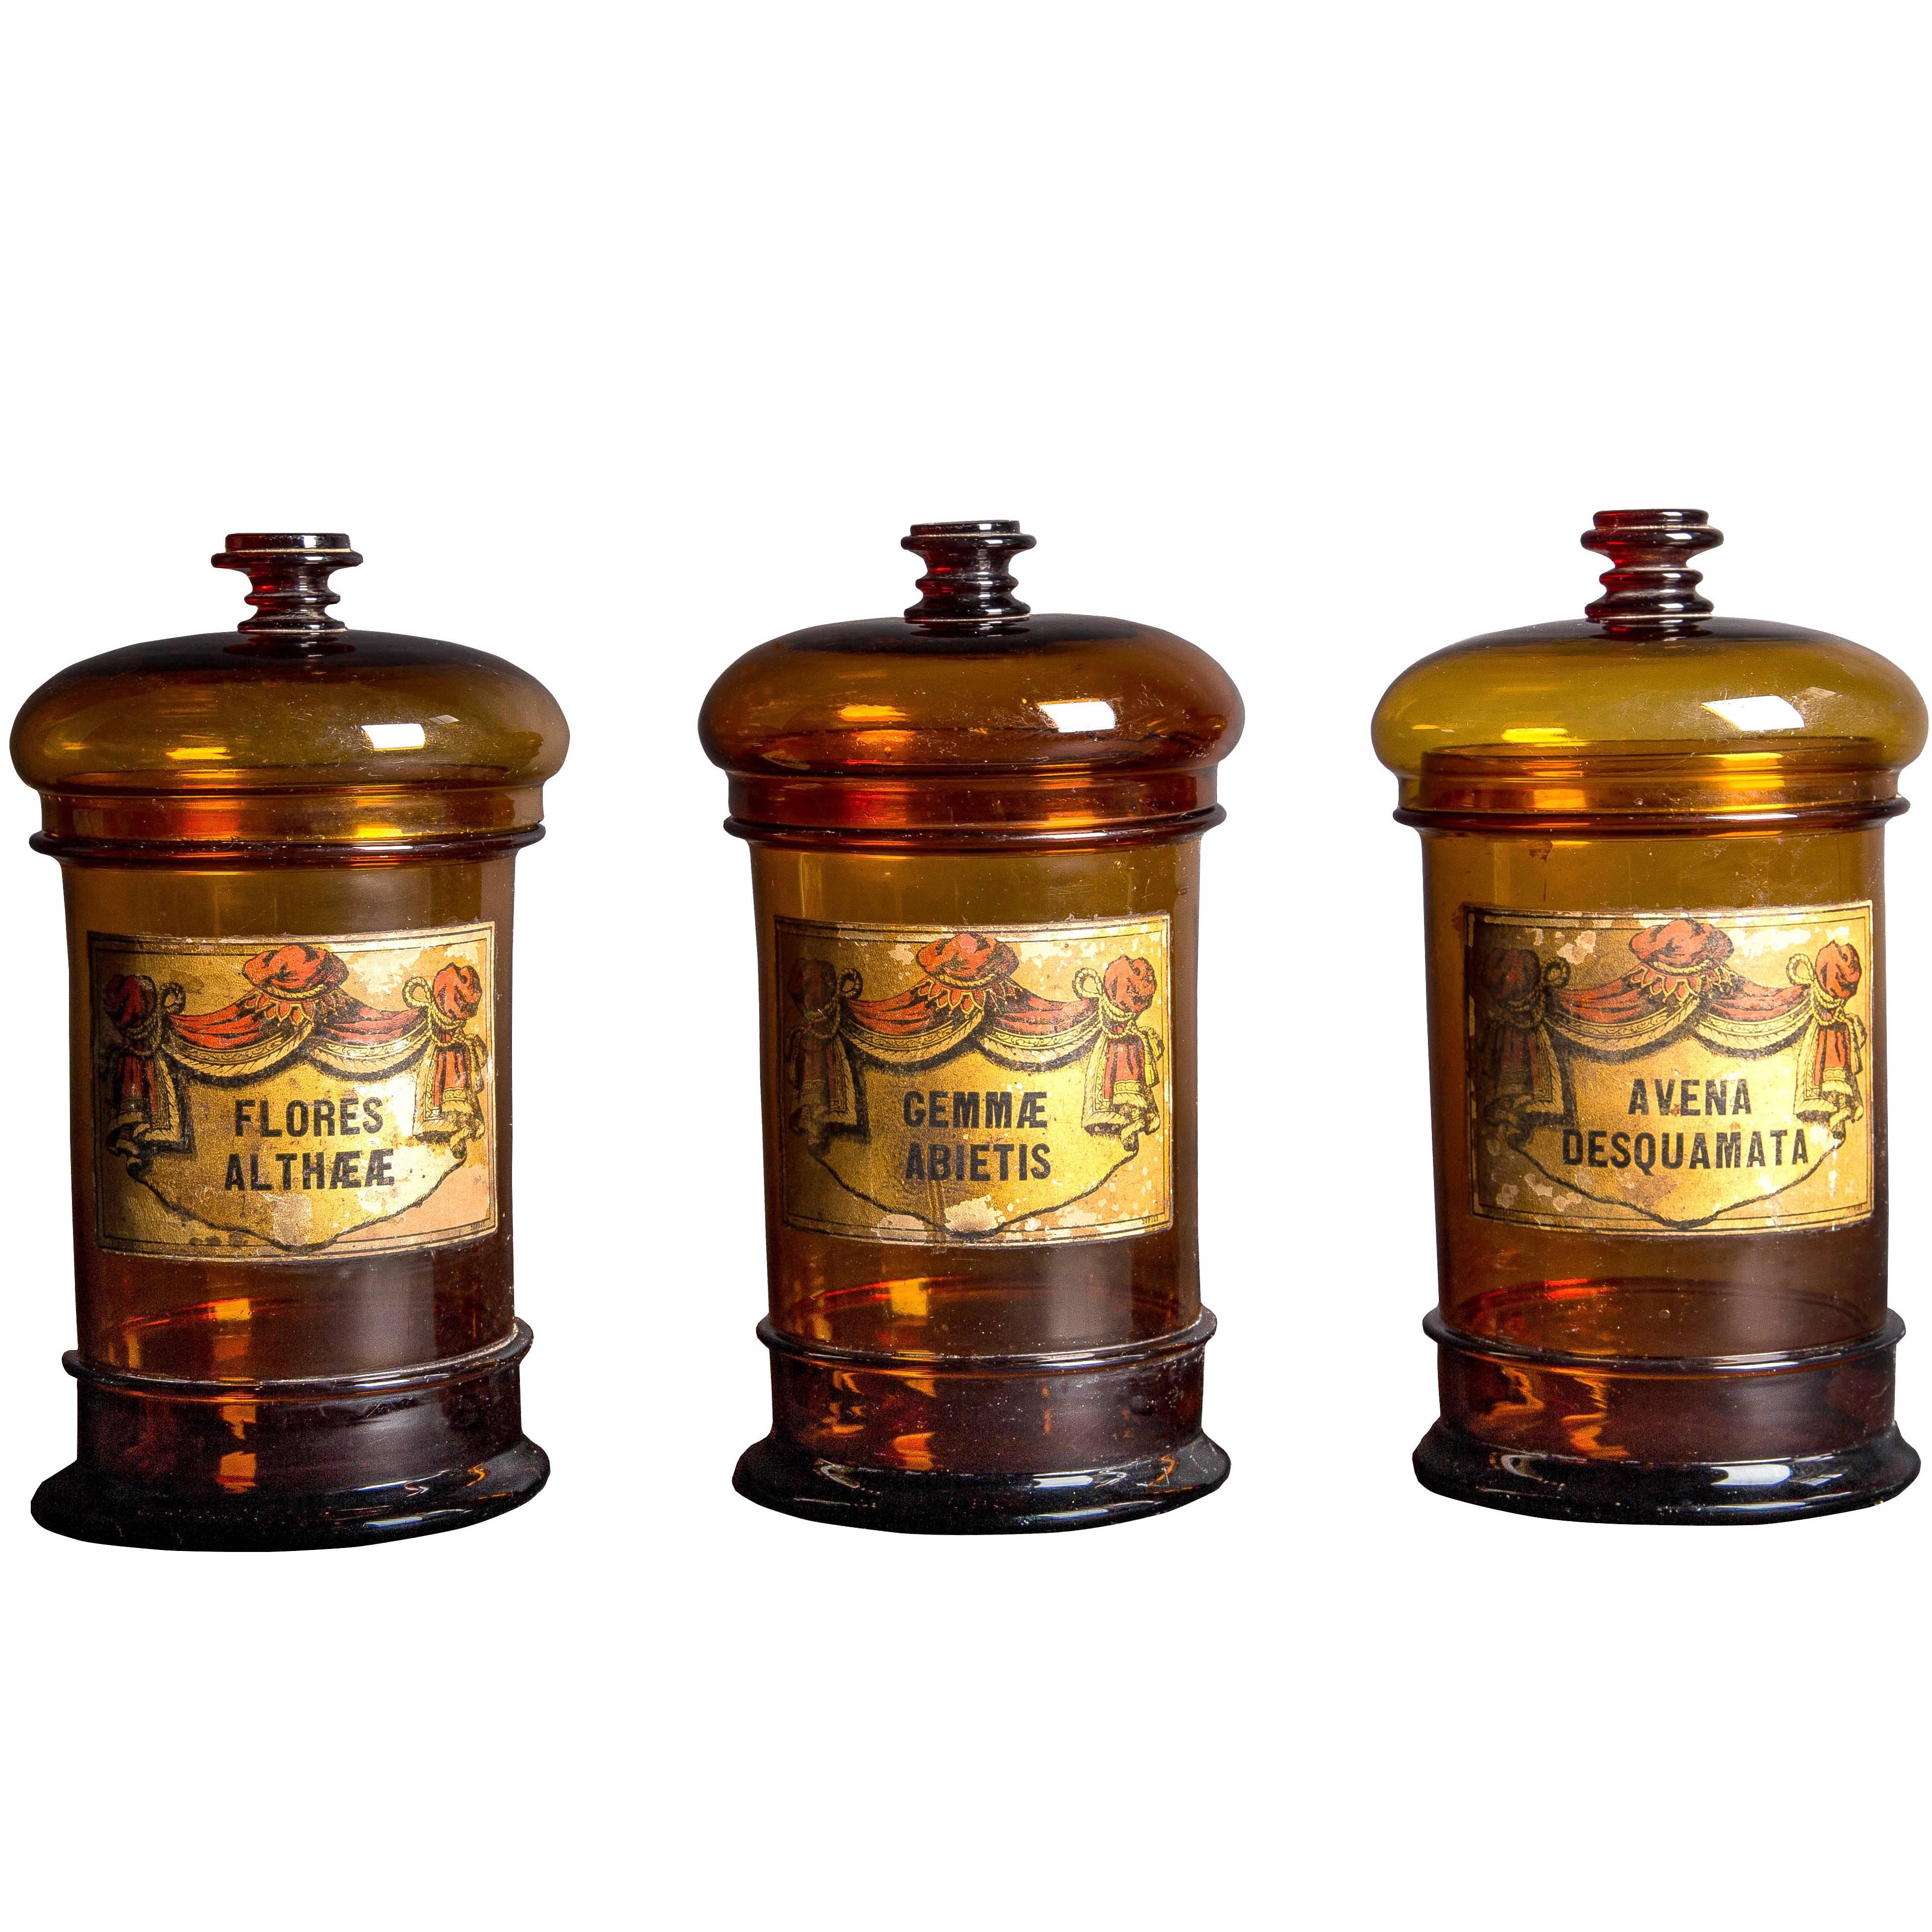 Three Balloon Lid Glass Apothecary Jars with Original Illustrative Labels